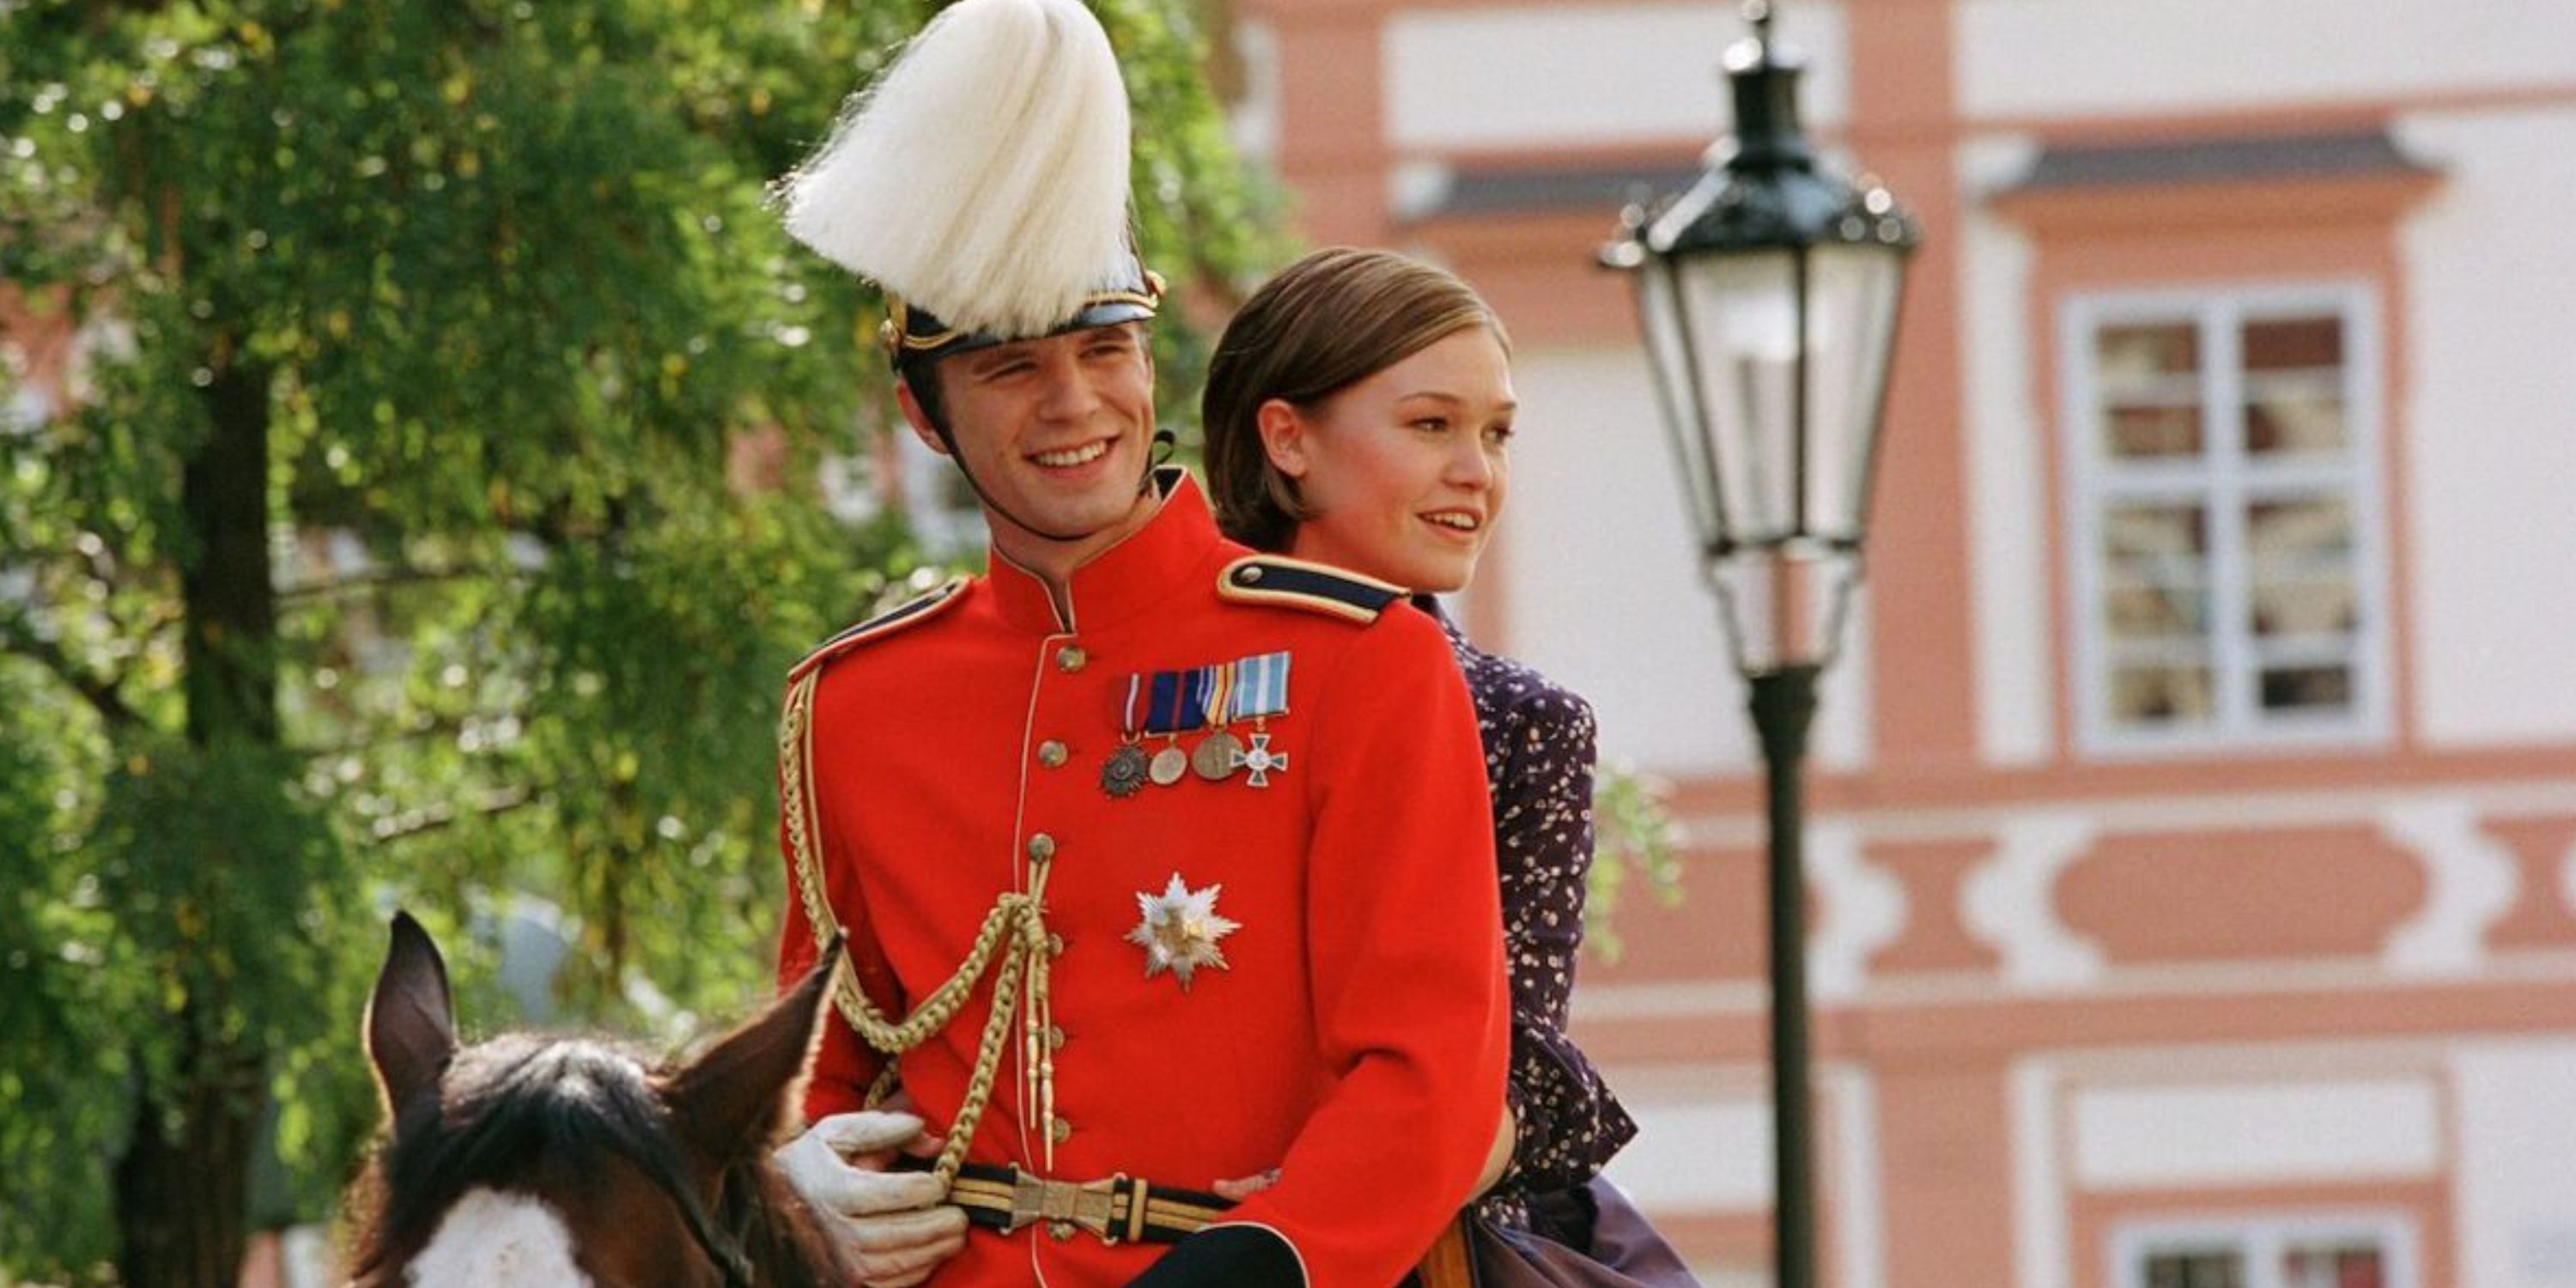 Luke Mably and Julia Stiles in The Prince & Me movie 